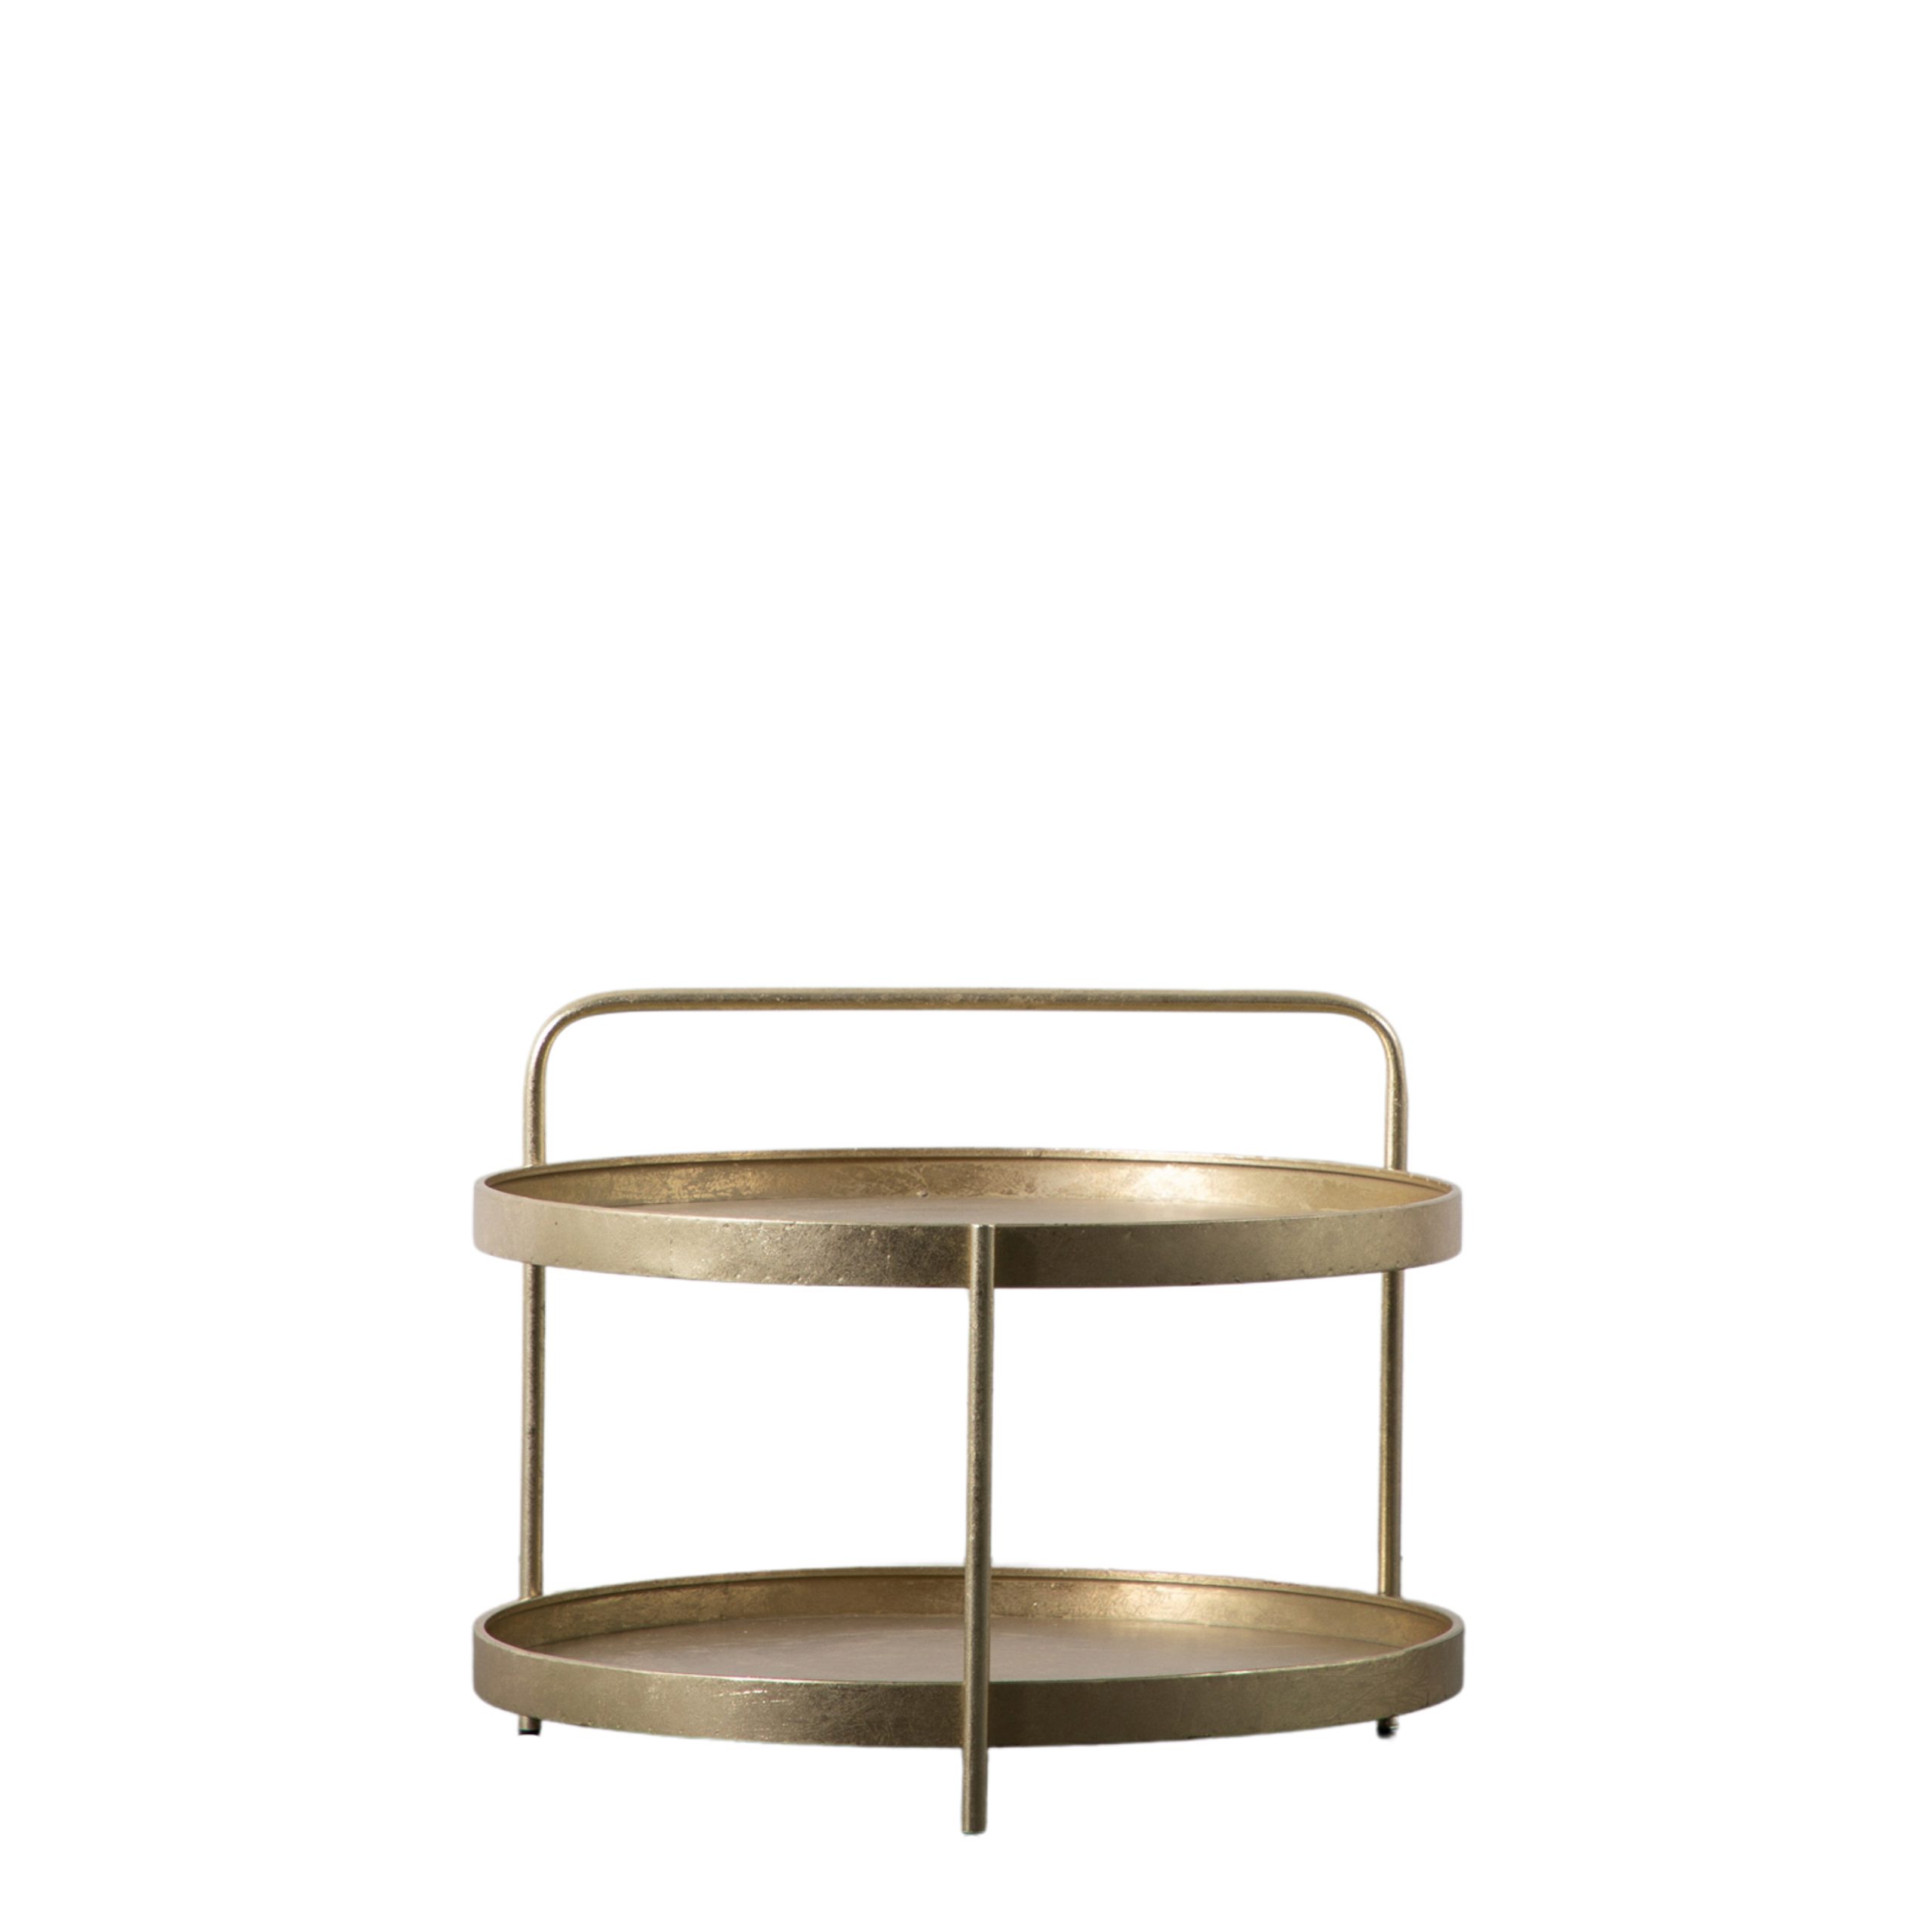 Gallery Direct Sennen Coffee Table Gold